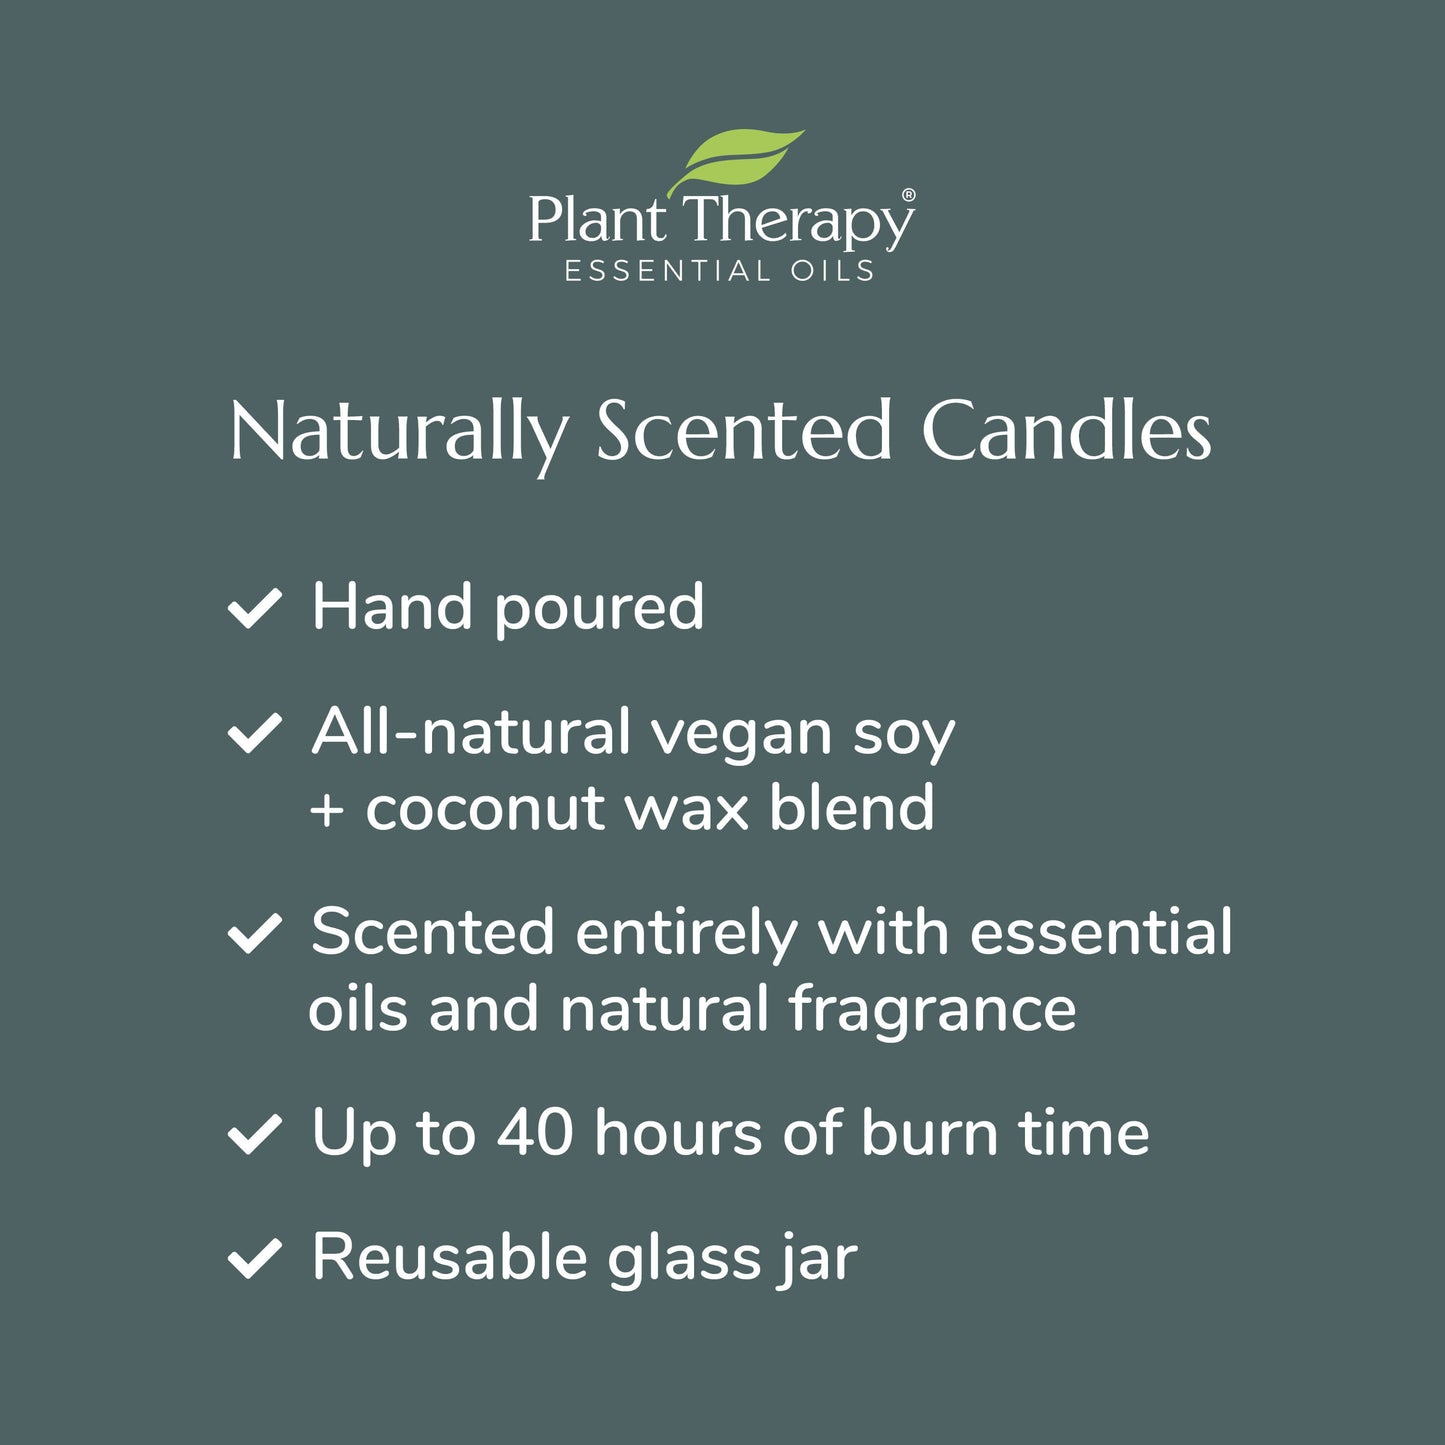 Naturally Scented Candle - hand poured, all natural vegan soy wax, scented with essential ois, 40 hours burn time, reusable glass jar